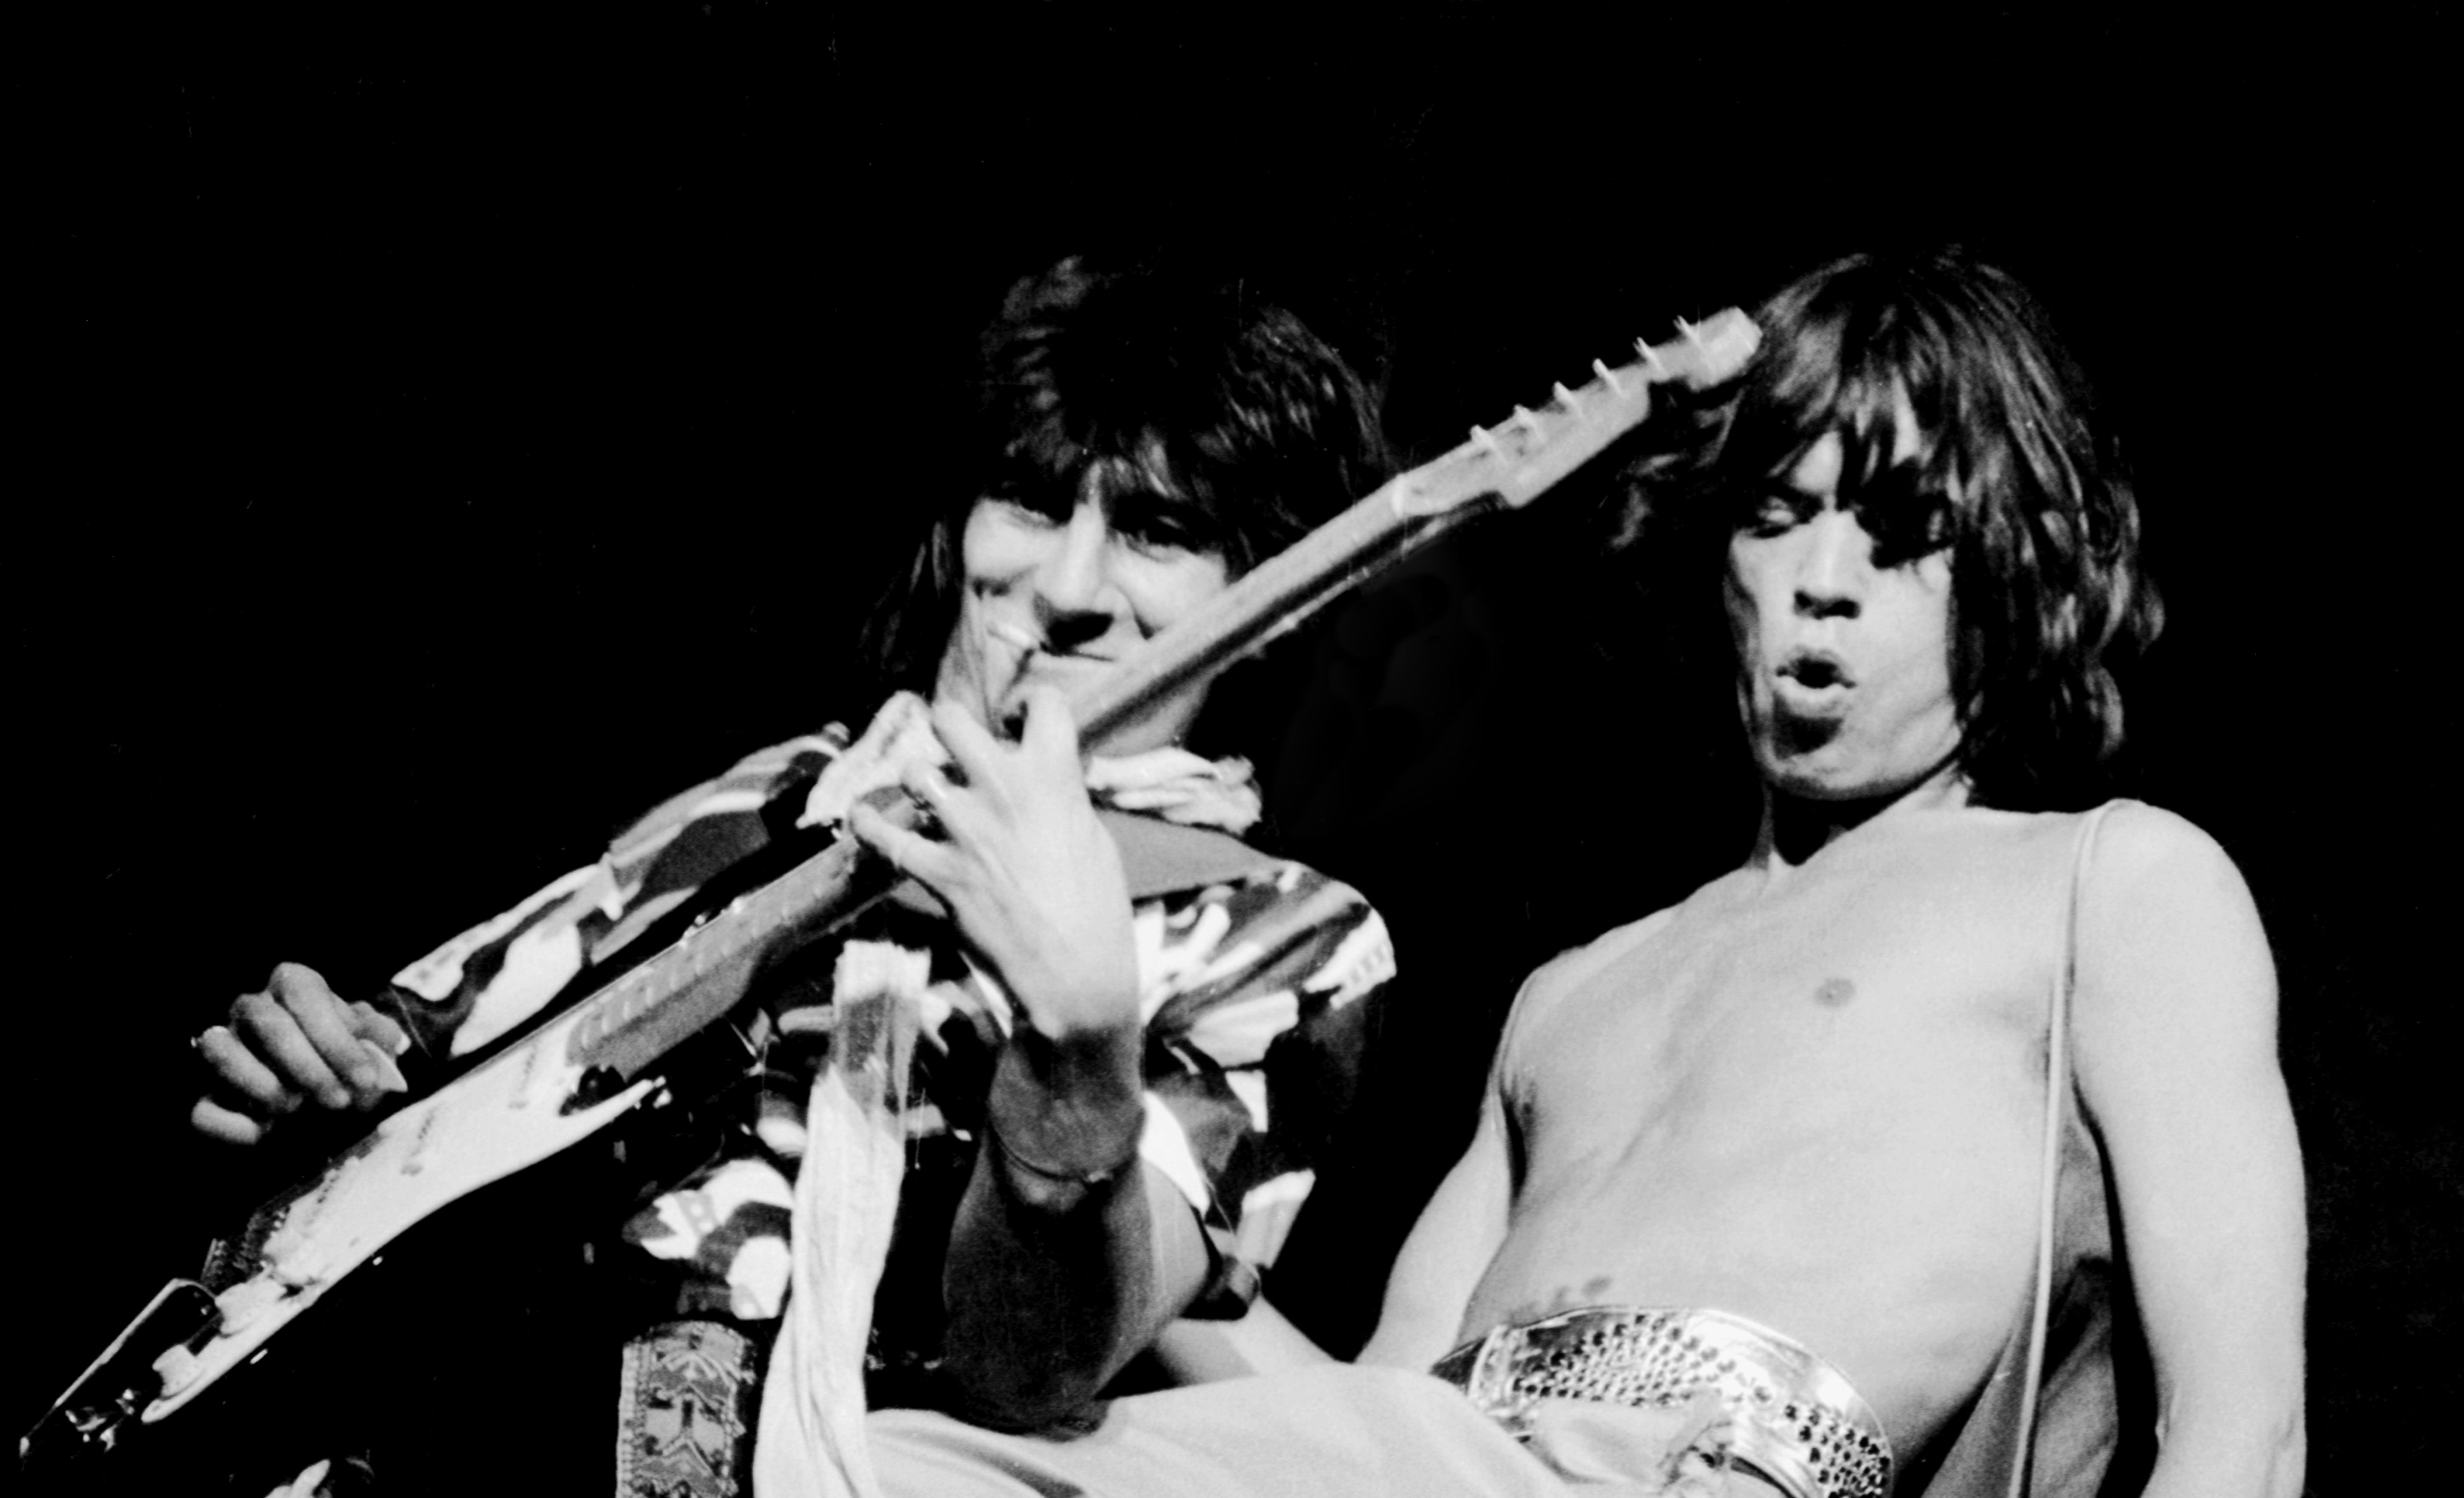 Ron Wood and Mick Jagger at Knebworth, 1976, not always getting what they wanted